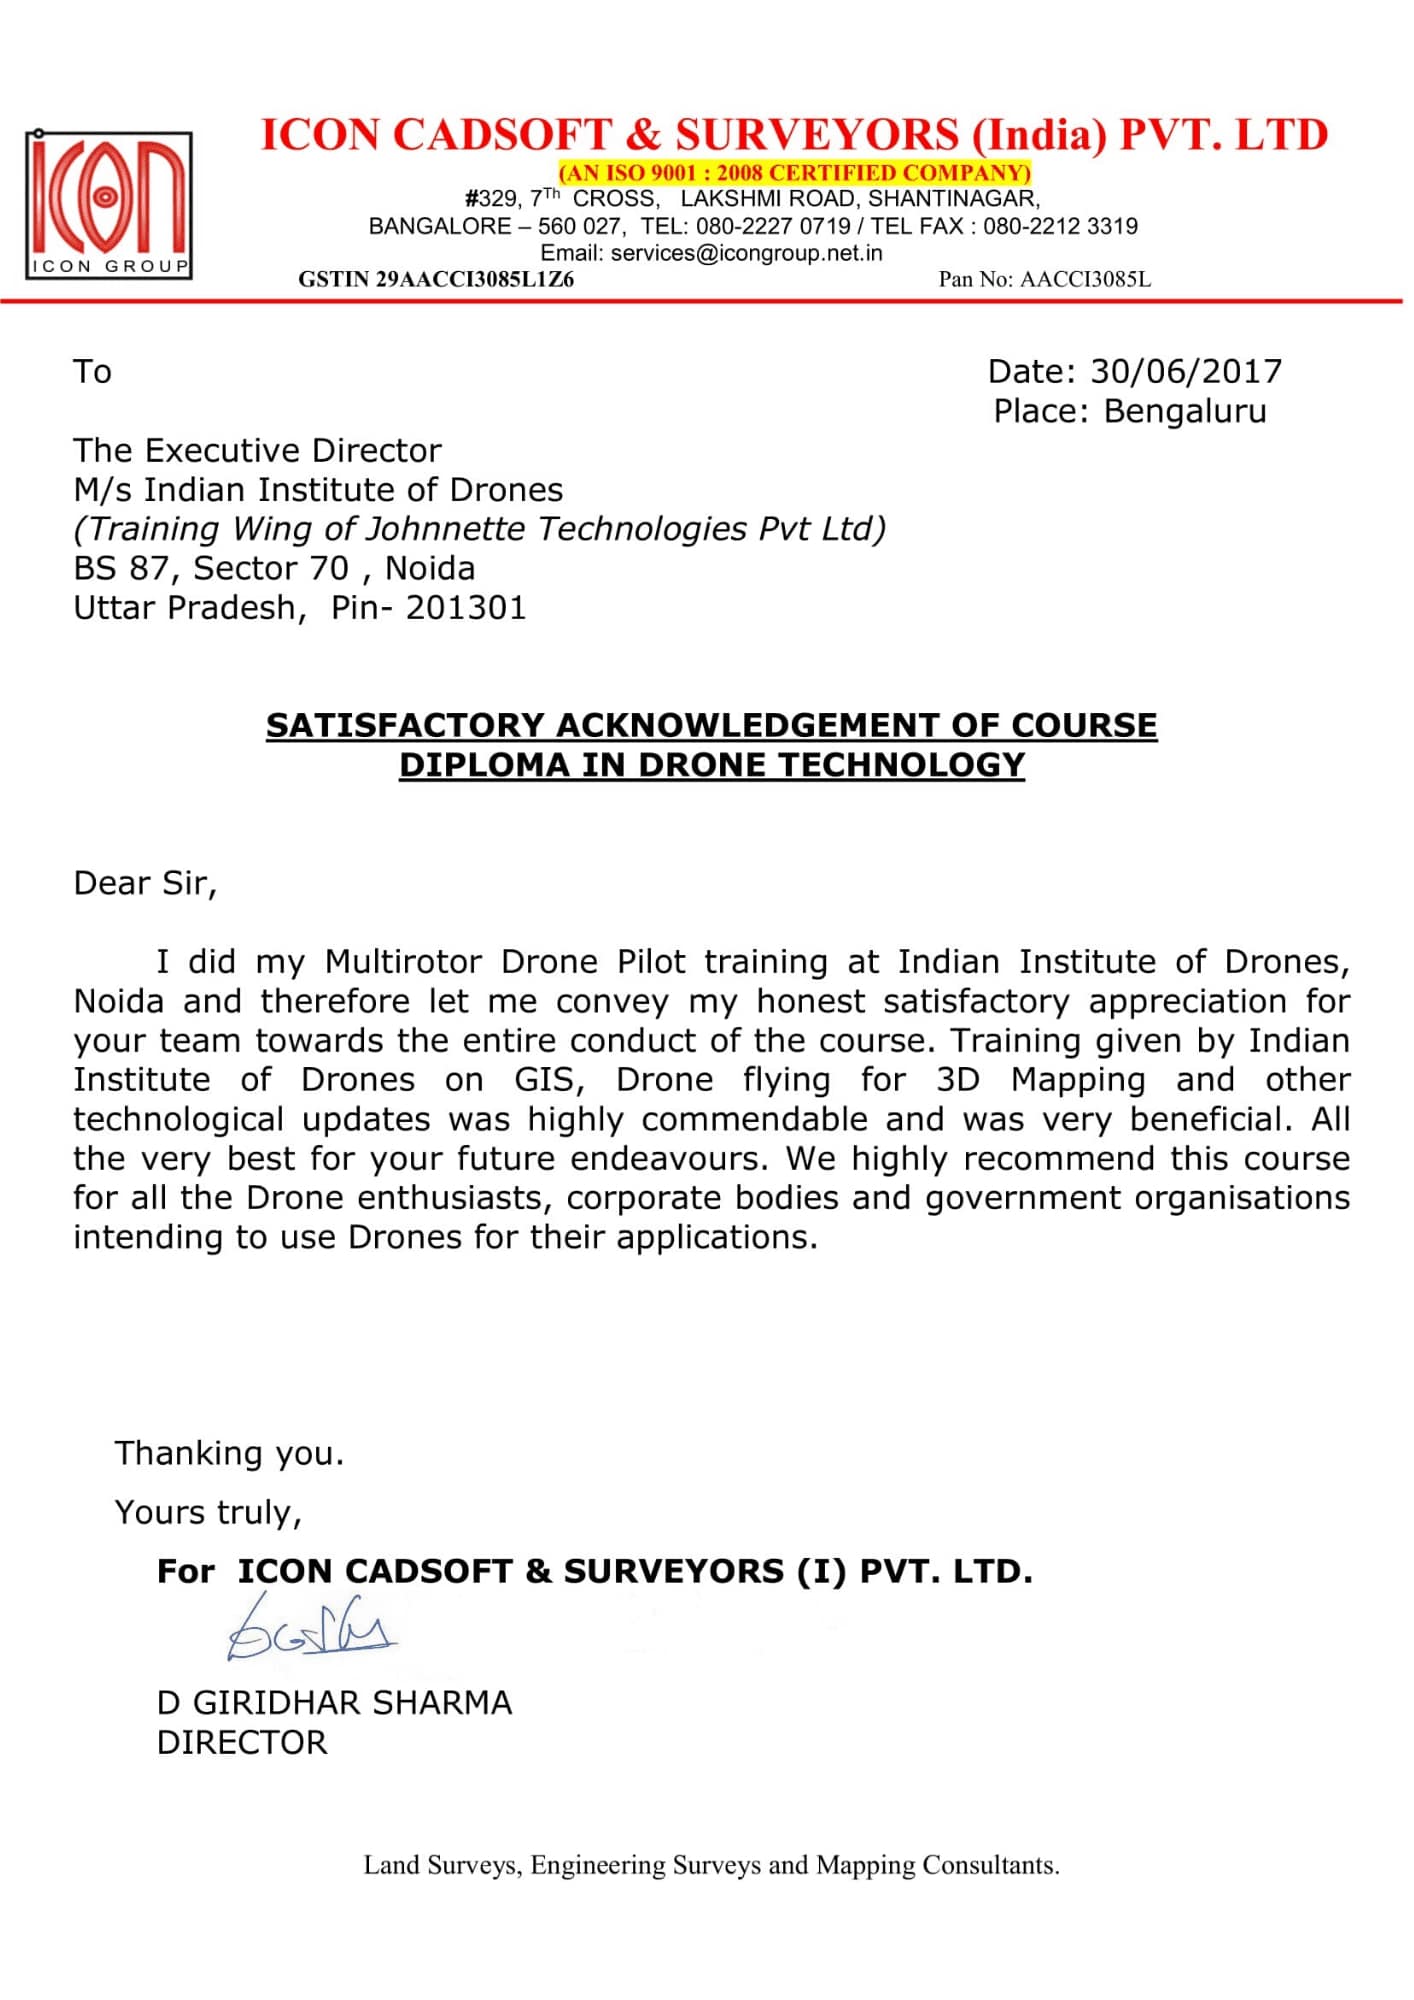 Satisfactory Letter from Icon Surveyors